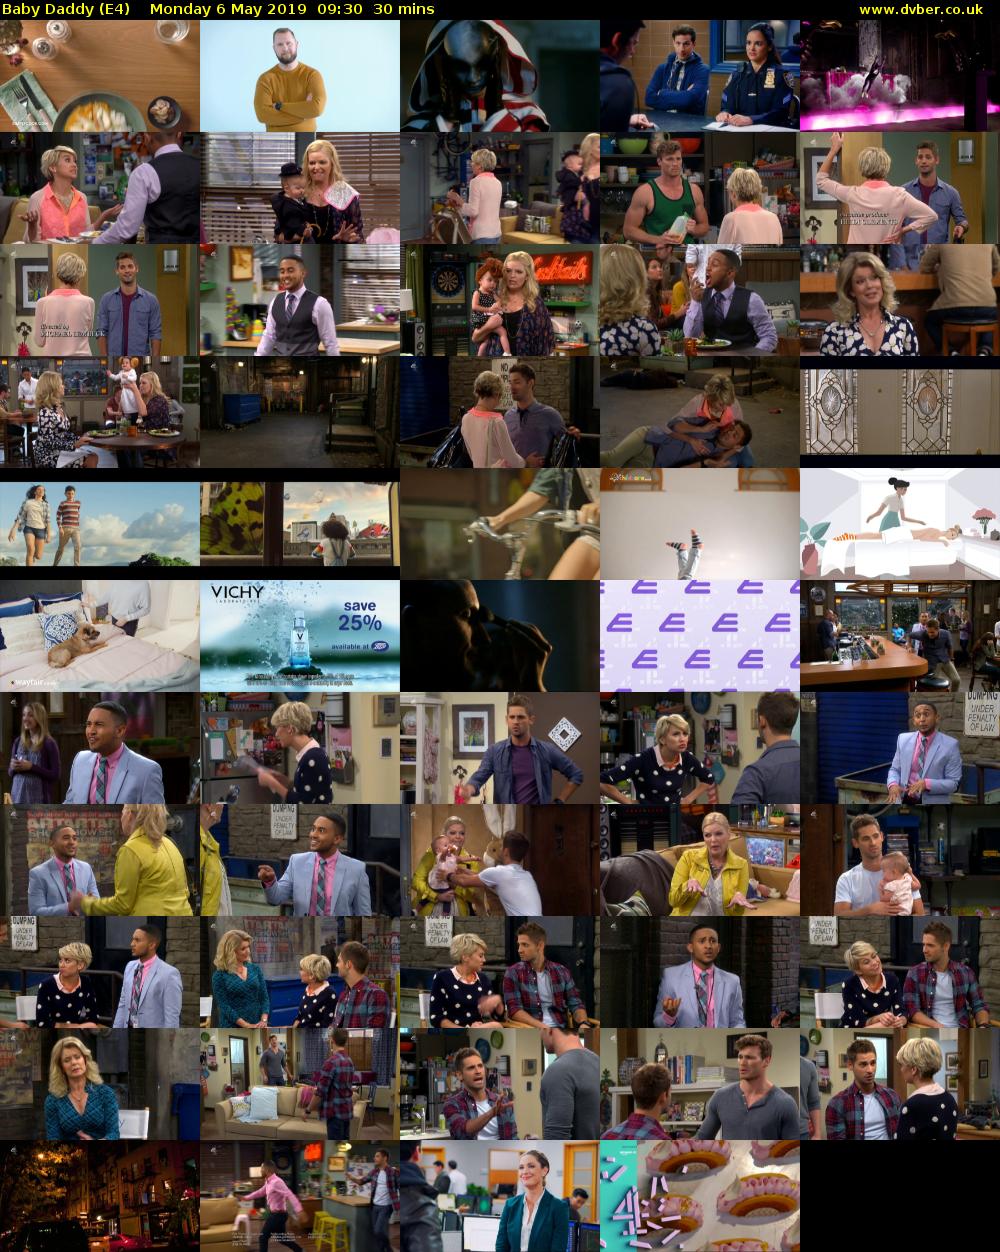 Baby Daddy (E4) Monday 6 May 2019 09:30 - 10:00